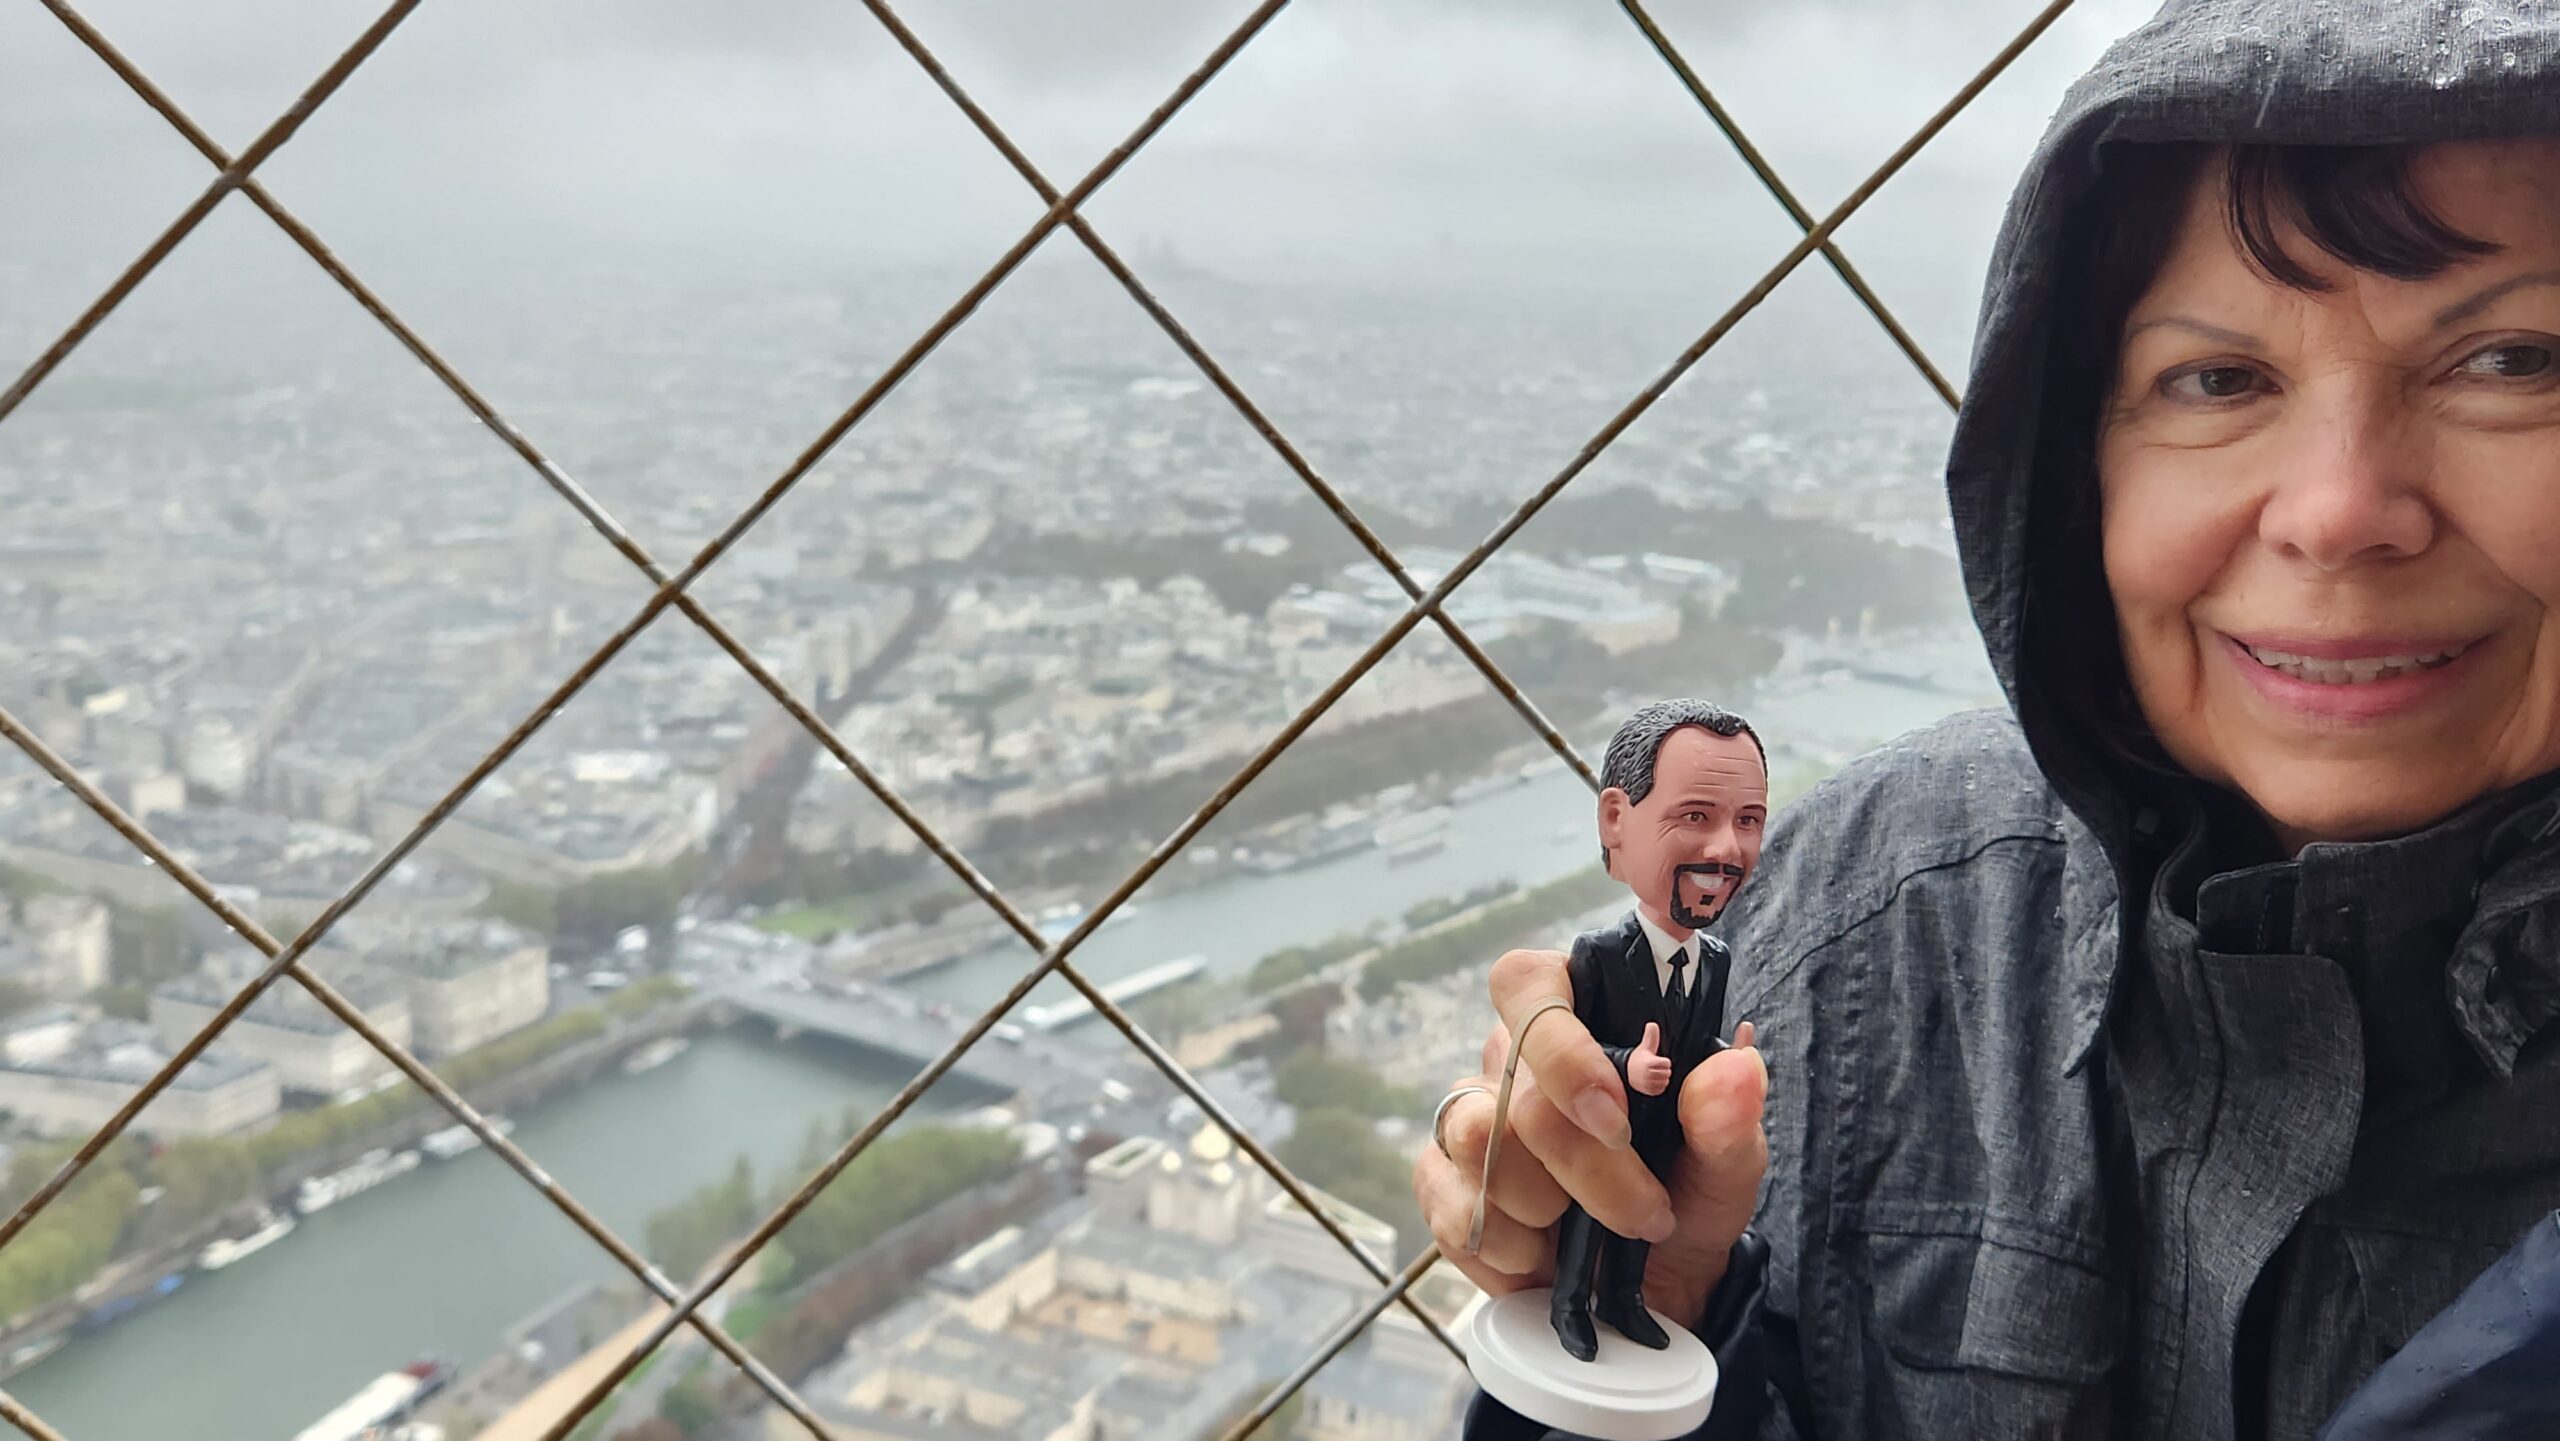 Little Danny at the top of the Eiffel Tower